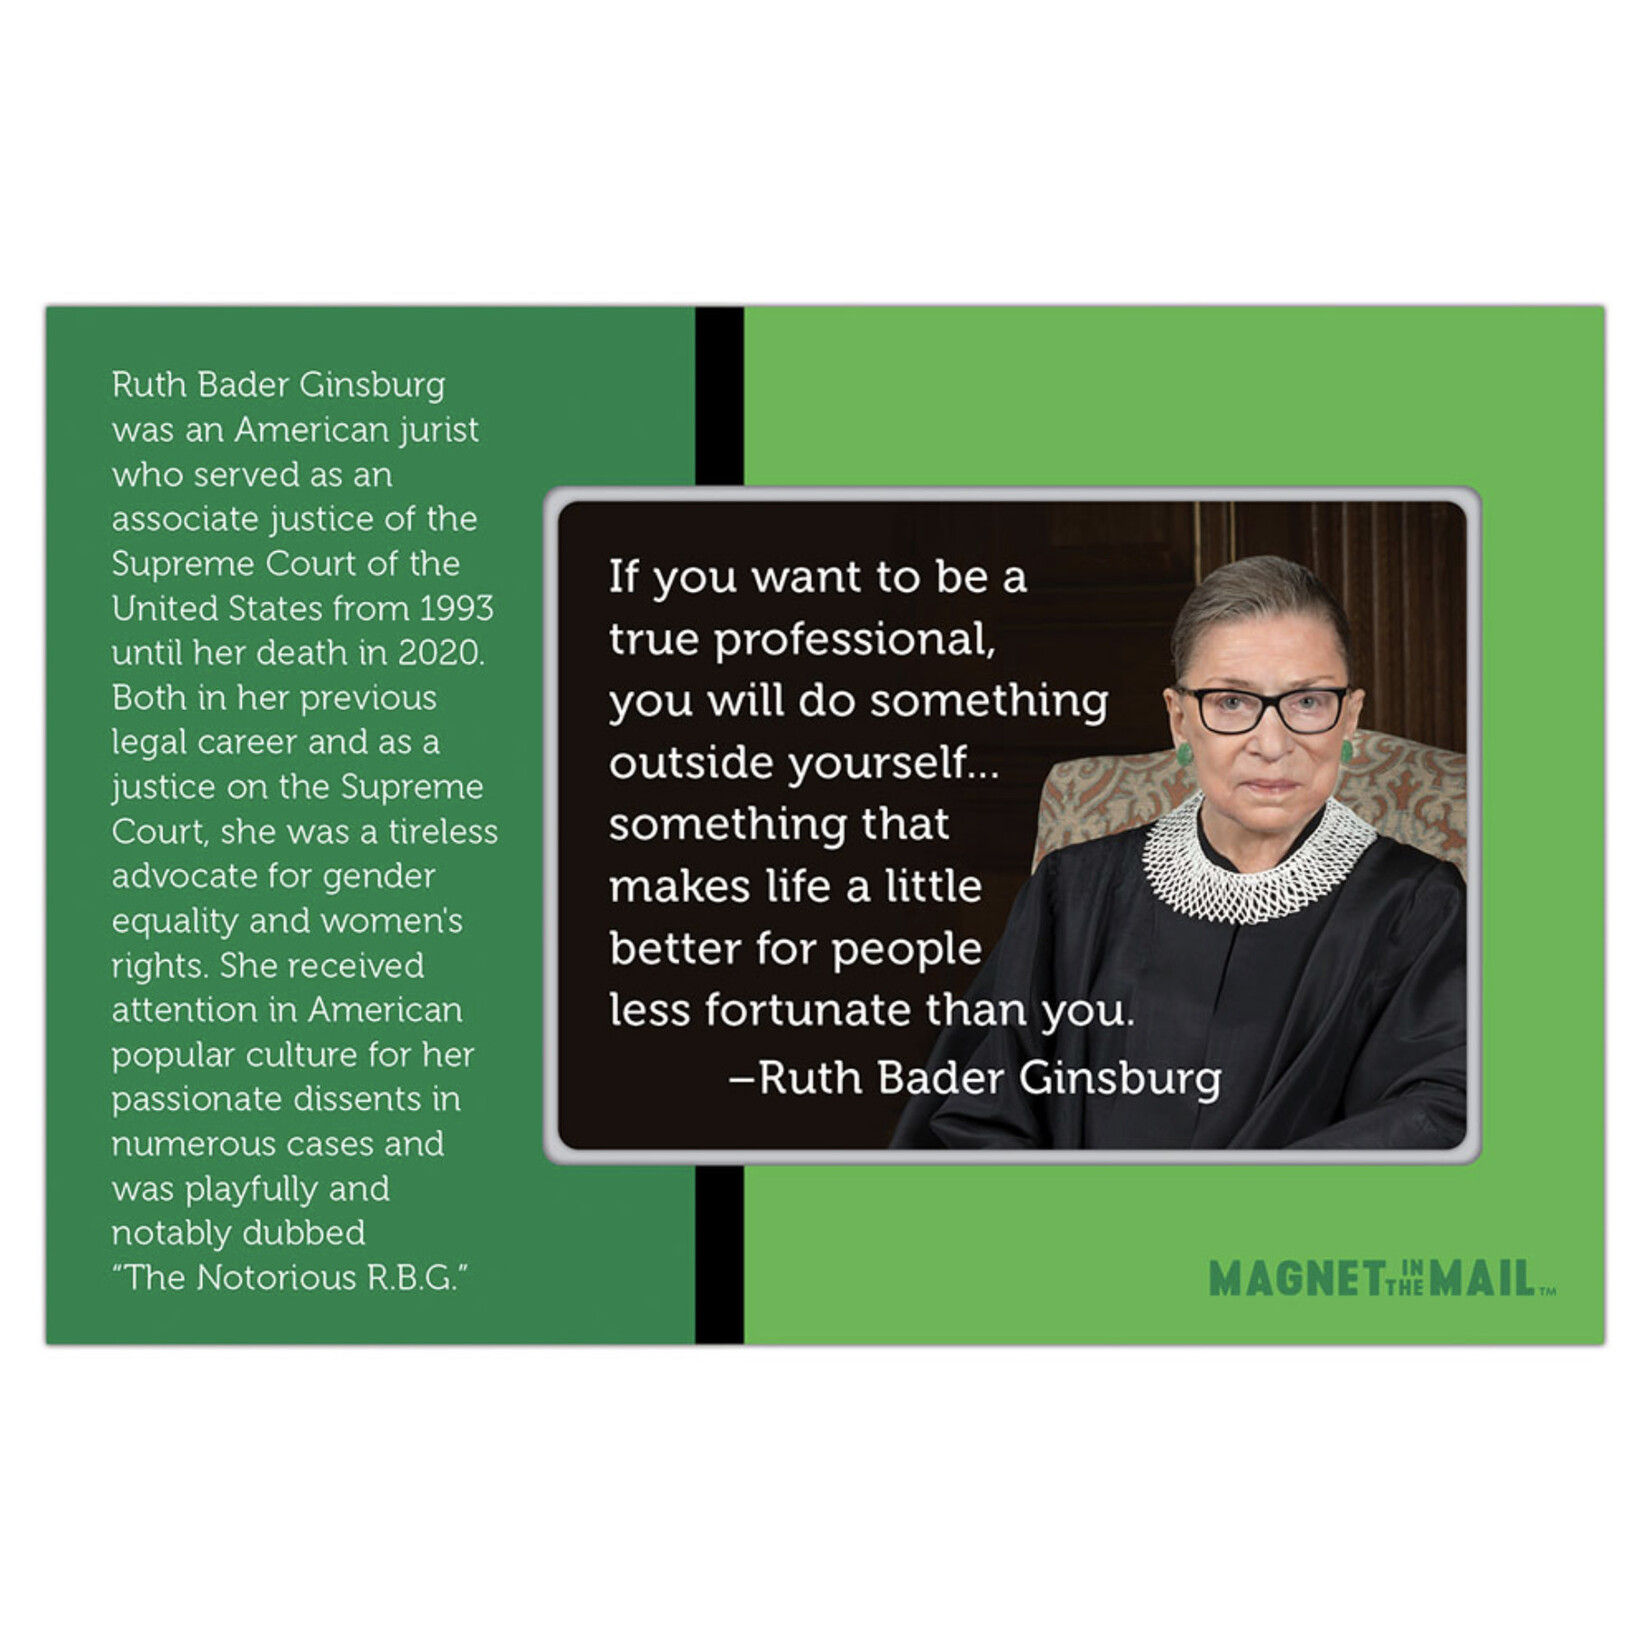 Magnet In The Mail - Ruth Bader Ginsberg (RBG)